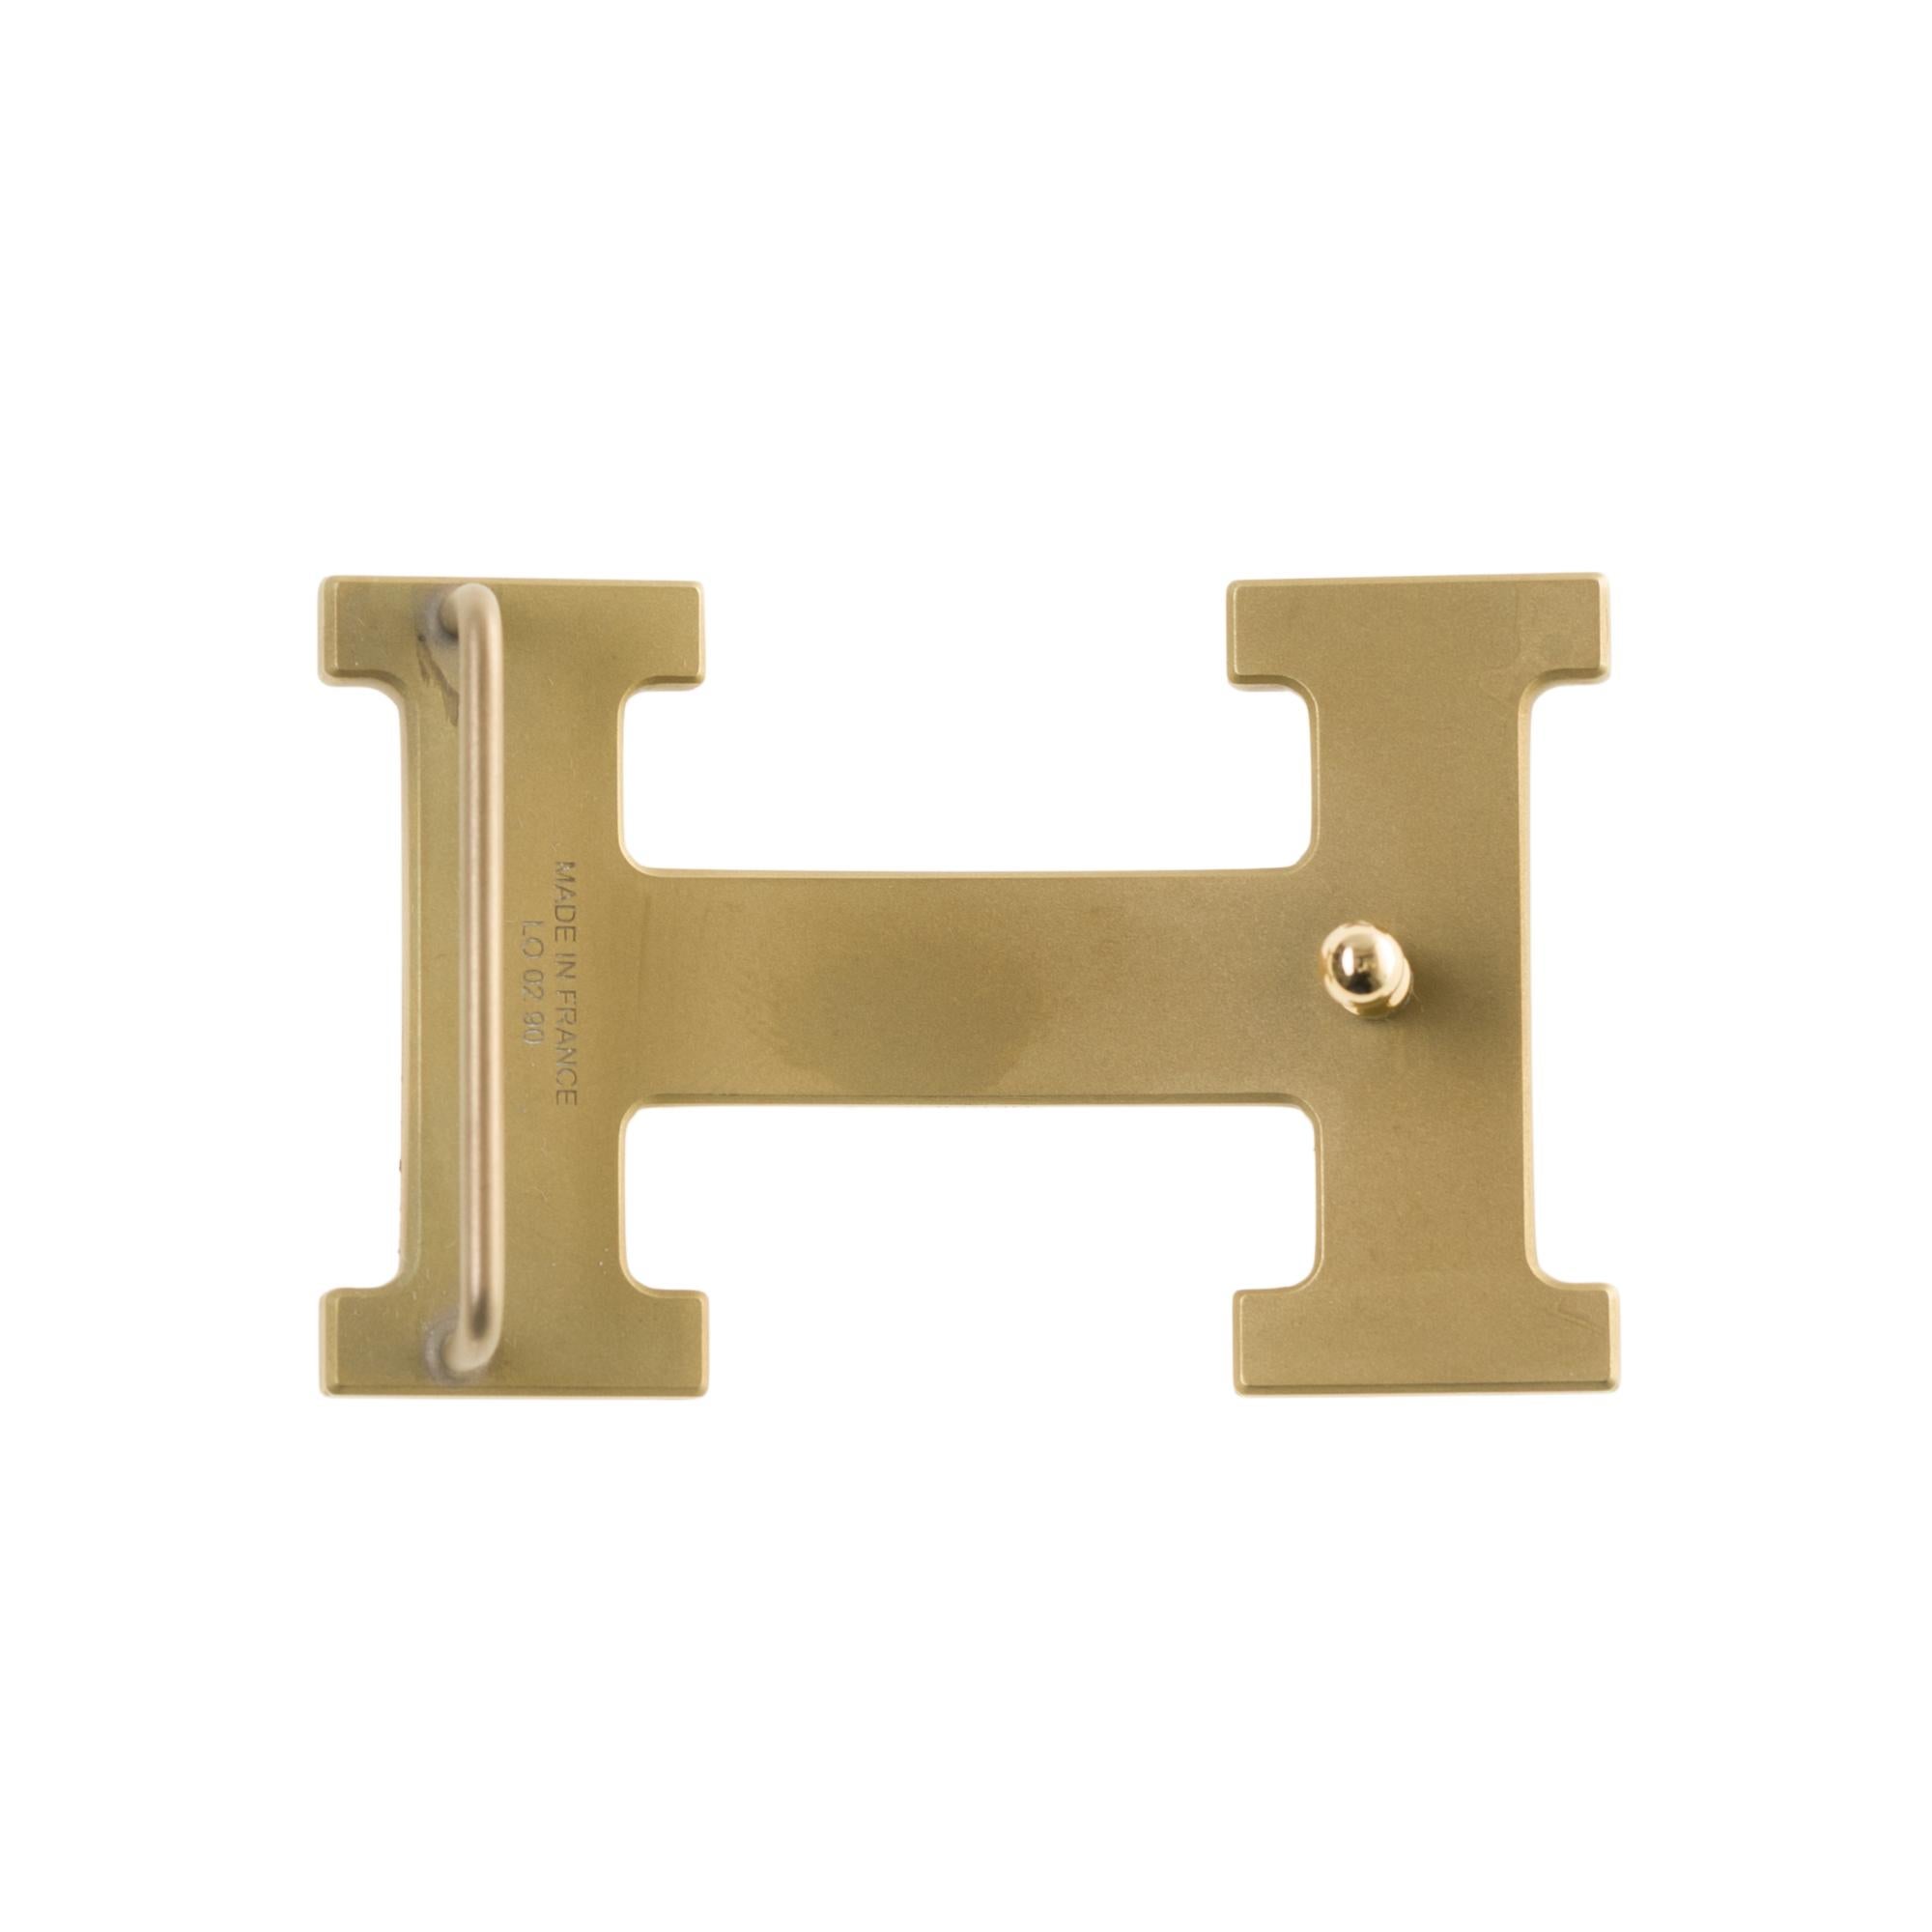 Type: Belt buckle
Brand: Hermès
Model: 5382
Material: matt PVD-plated metal
Colour: Gold
Signed HERMES on the tranche
Form: H
For 3.2 cm wide leather link (leather link not provided)
Dimensions: H: 3.7 x W: 6 x D: 1.4 cm
Brand new - Sold with